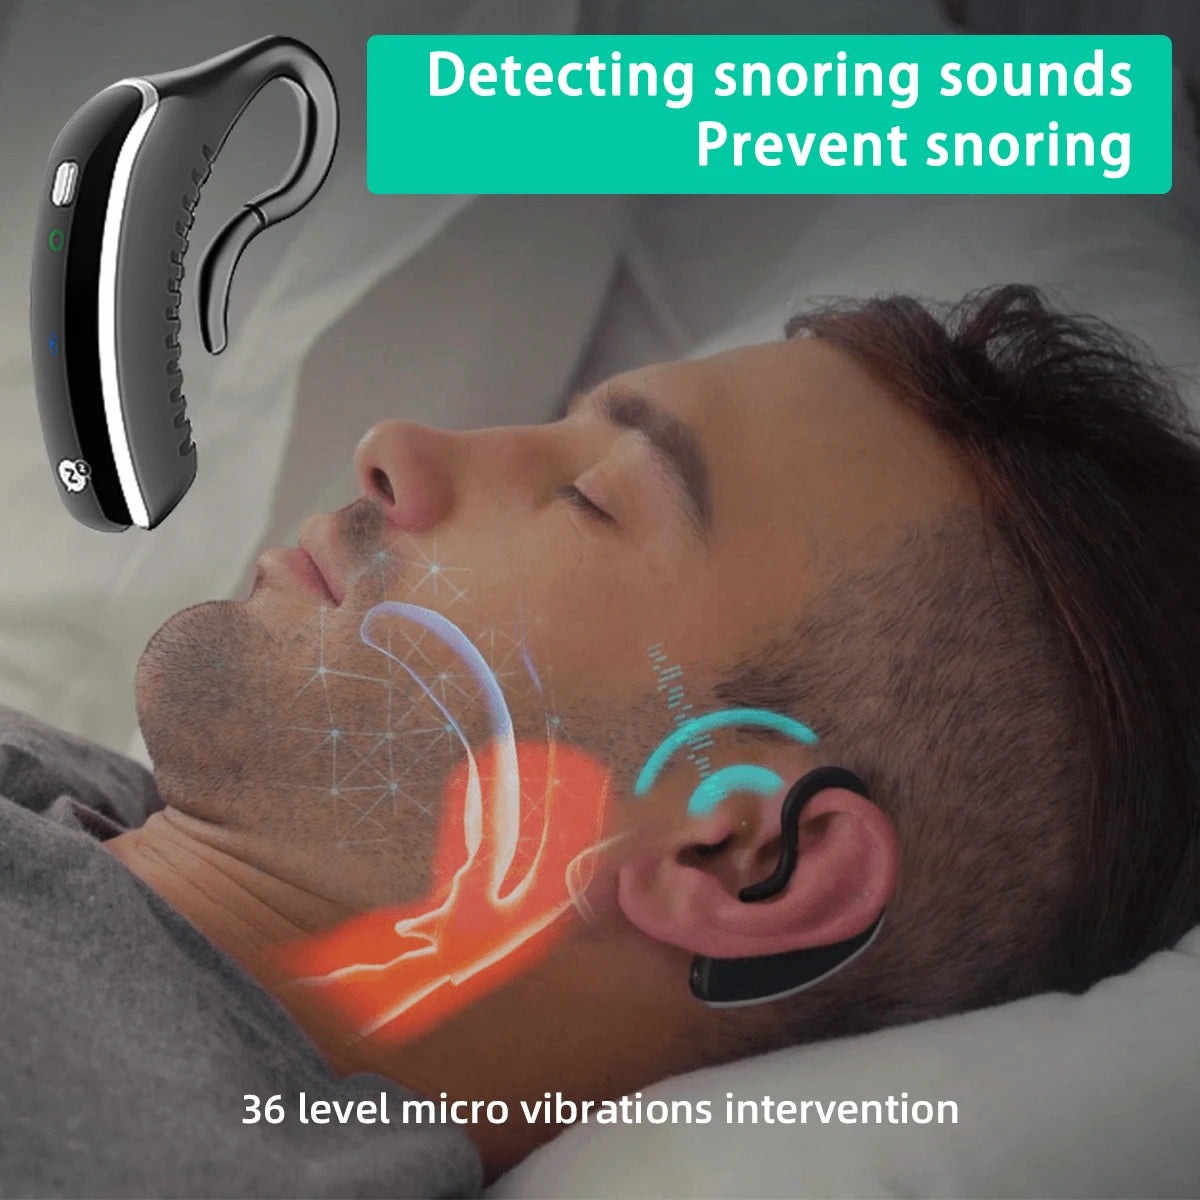 Anti Snoring Earset Smart Device Pro for Men and Women. Effective and Safe Ear Sleep Aid to Stop Snoring, Analyze Real-Time Sleep and Snoring Data Wirelessly. Solution for Snore Relief